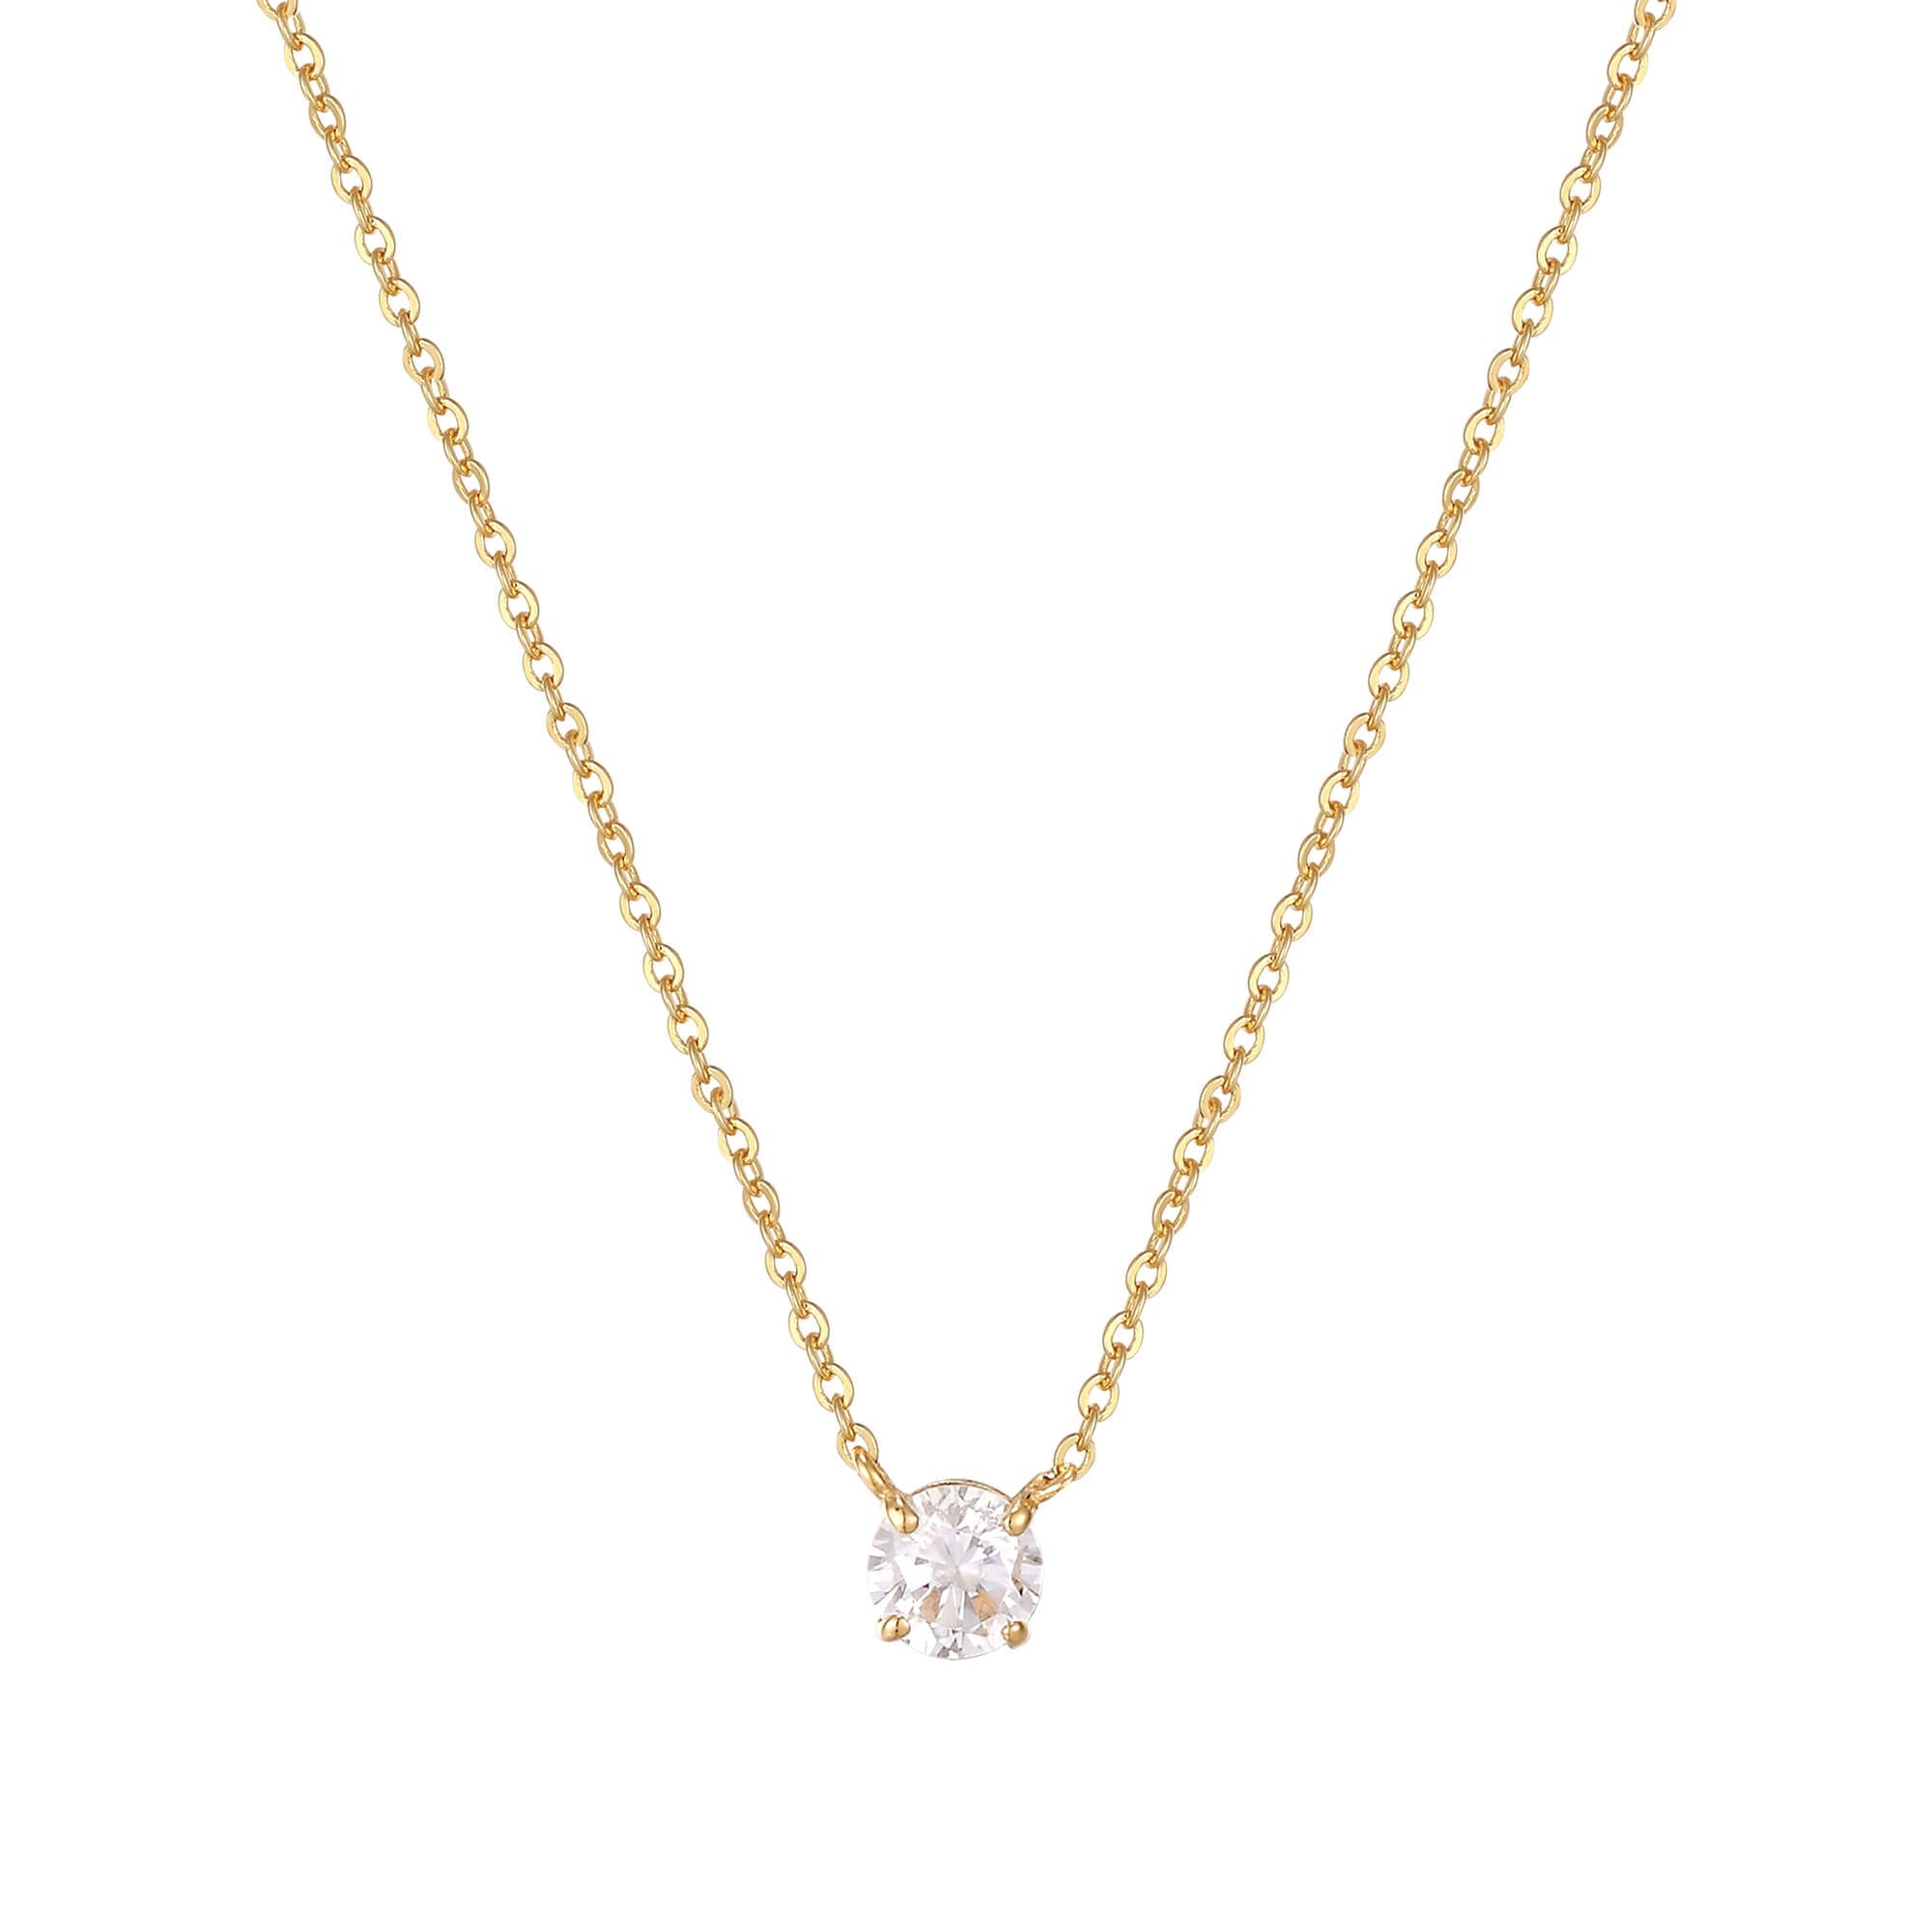 Gold Solitaire Necklace - seol-gold